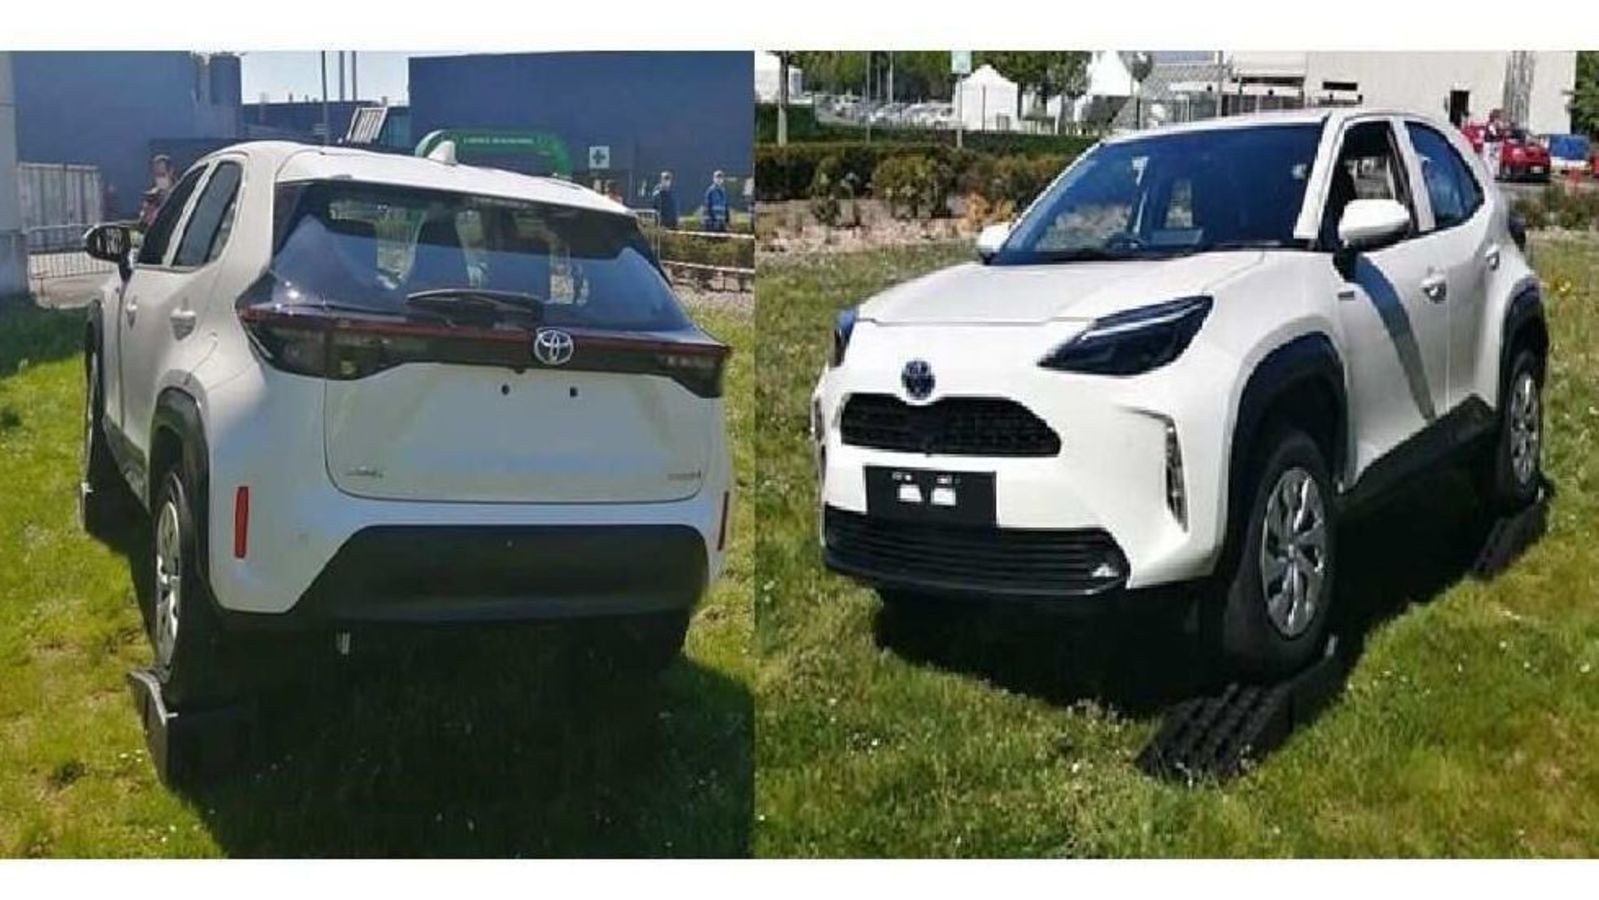 Toyota Yaris Cross snapped in 'first-ever' real life photos